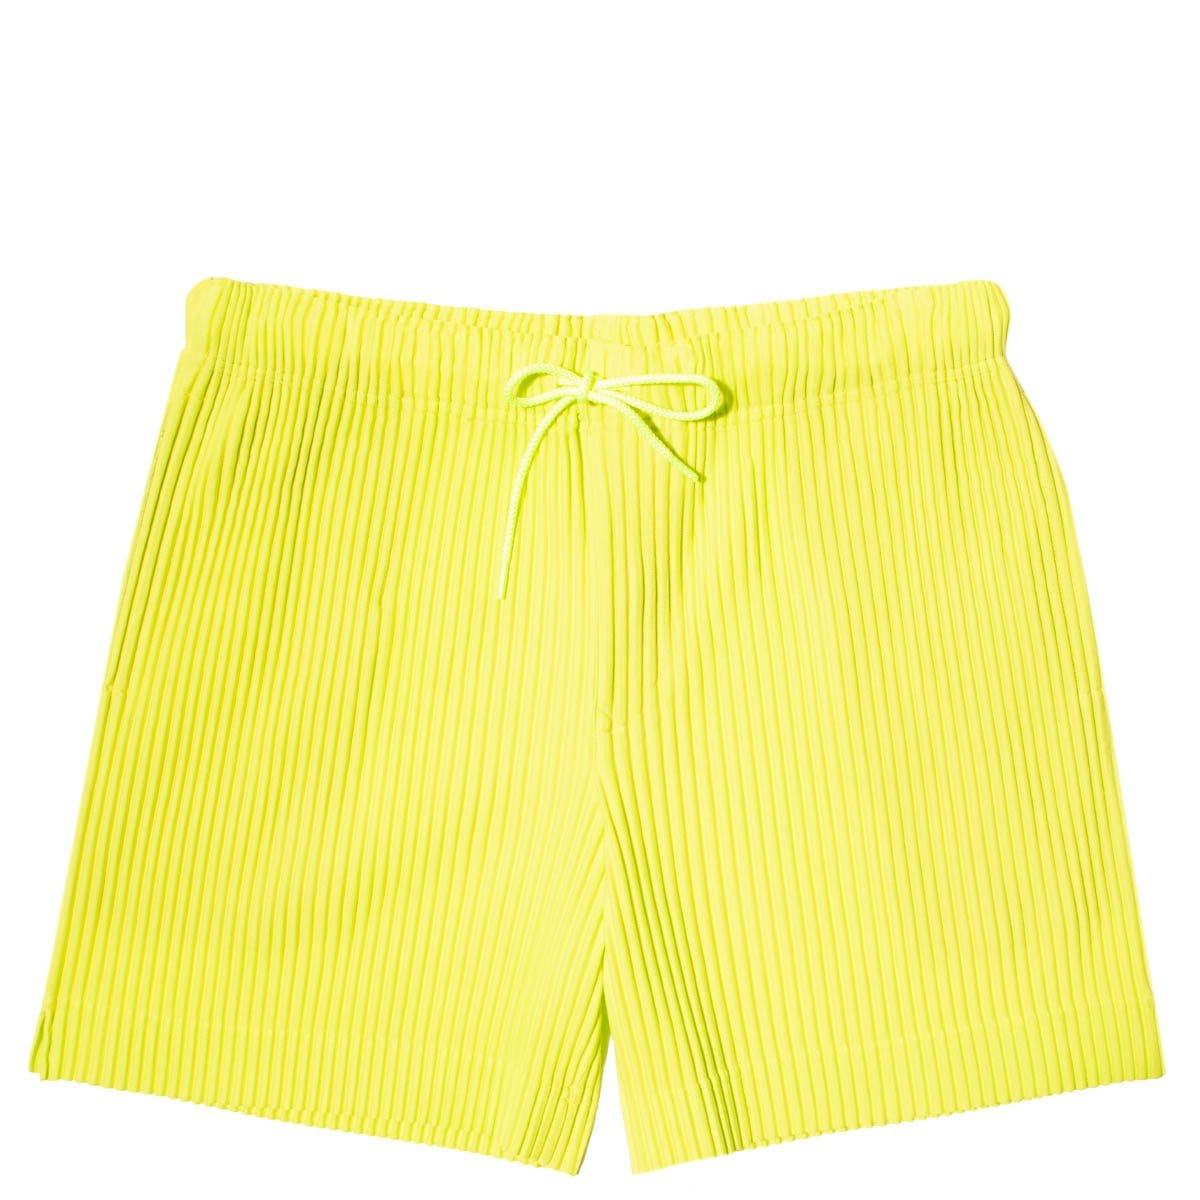 Homme Plissé Issey Miyake Bottoms YELLOW / O/S SHORTS 50